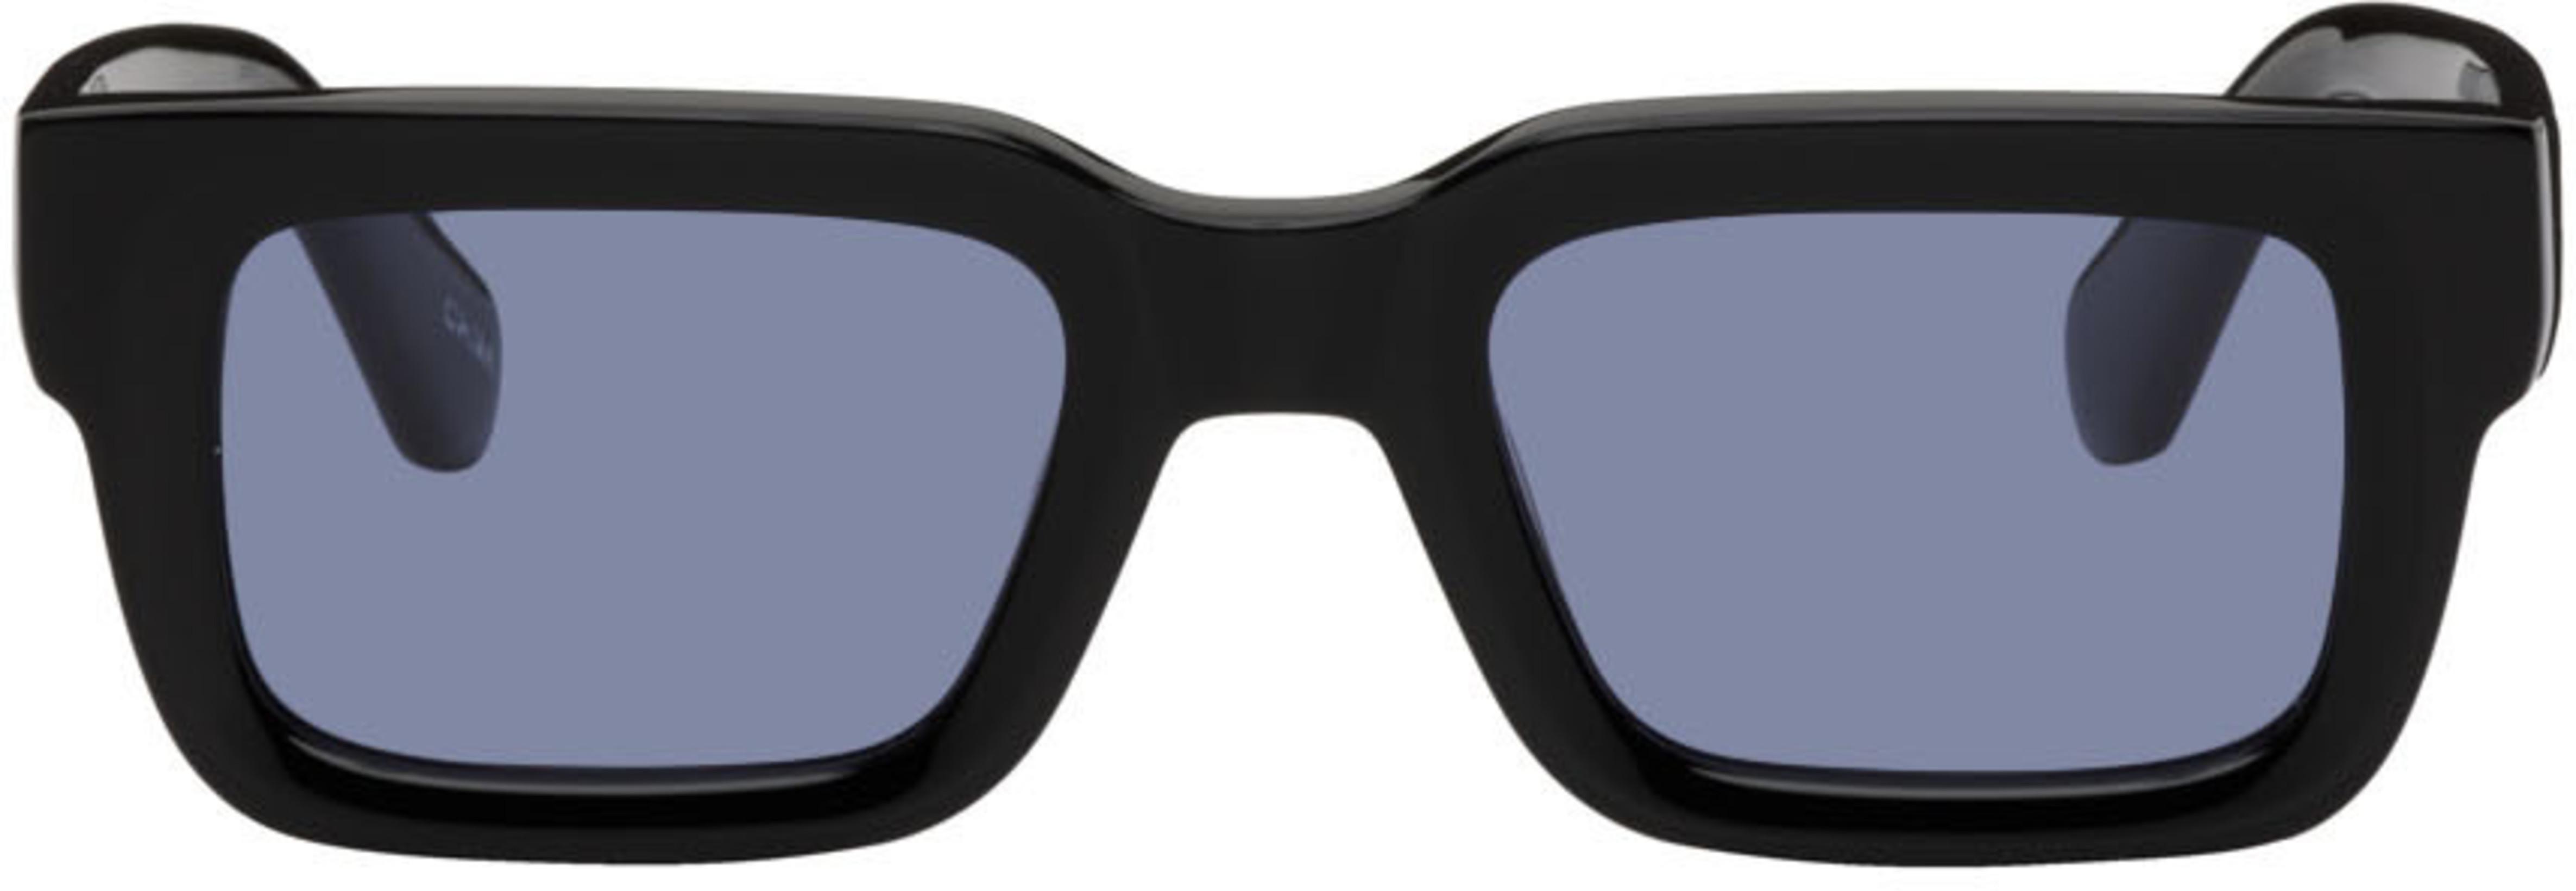 SSENSE Exclusive Black 05 Sunglasses by CHIMI